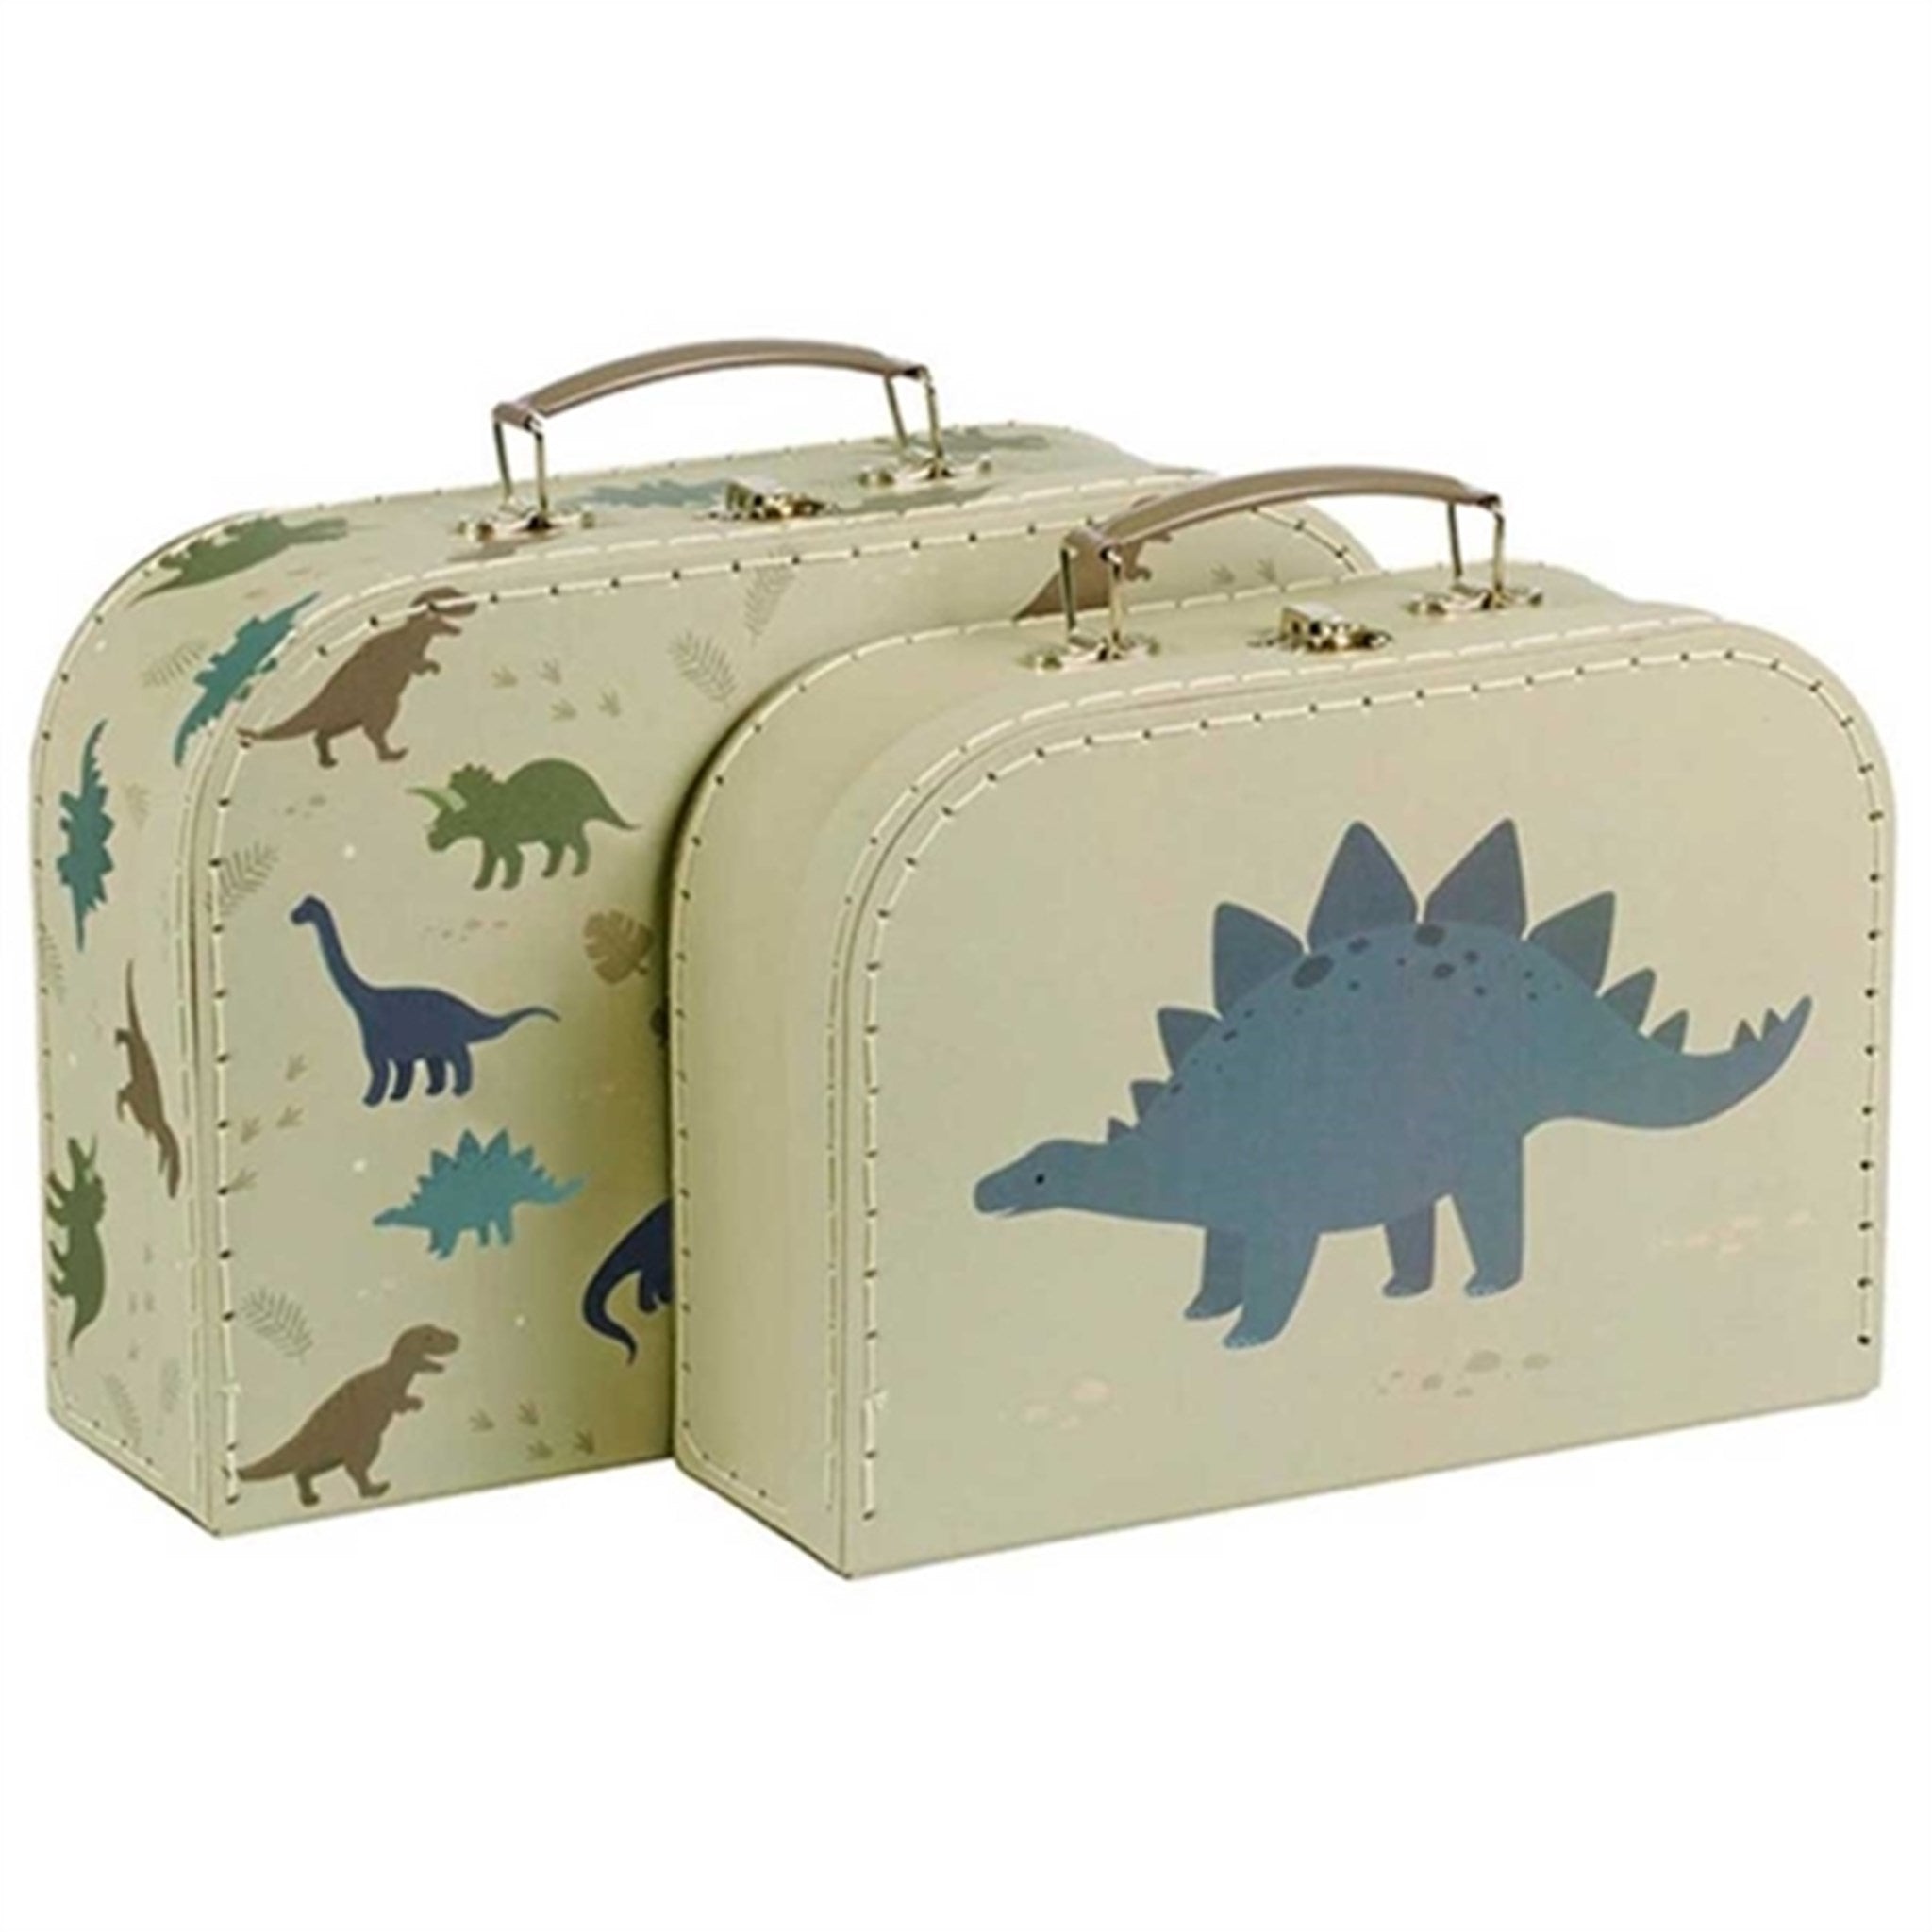 A Little Love Company Suitcase 2-pack Dinosaurs